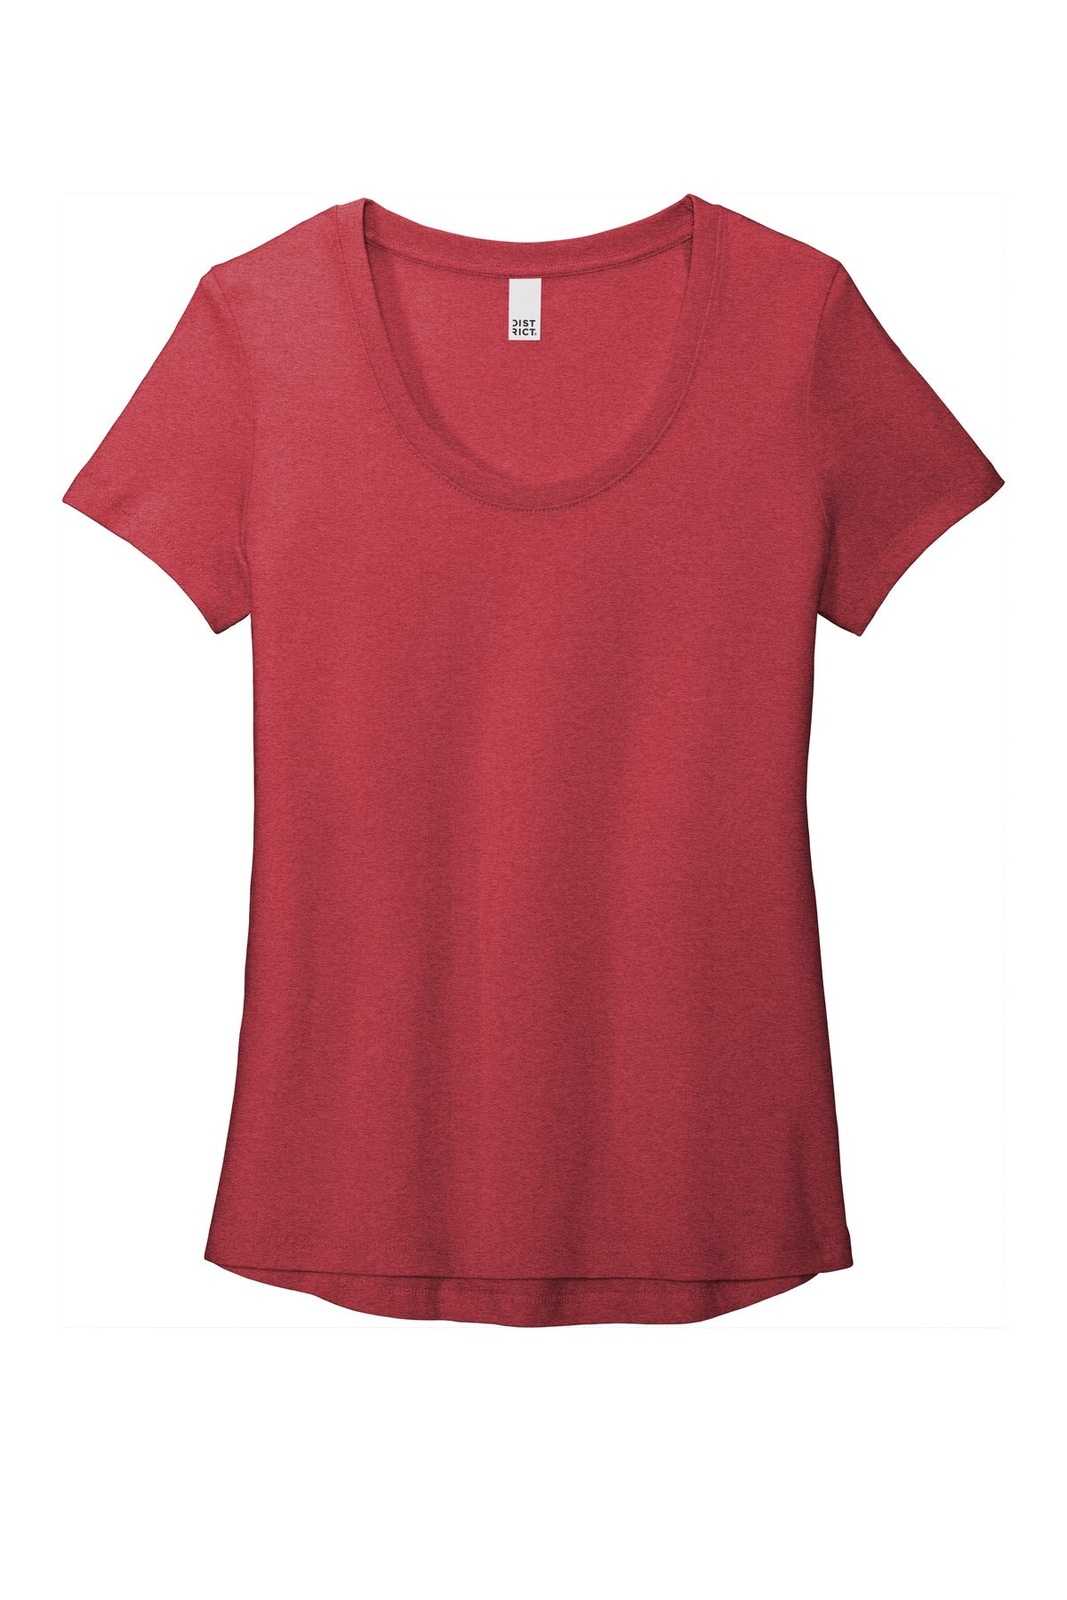 District DT7501 Womens Flex Scoop Neck Tee - Heathered Red - HIT a Double - 5